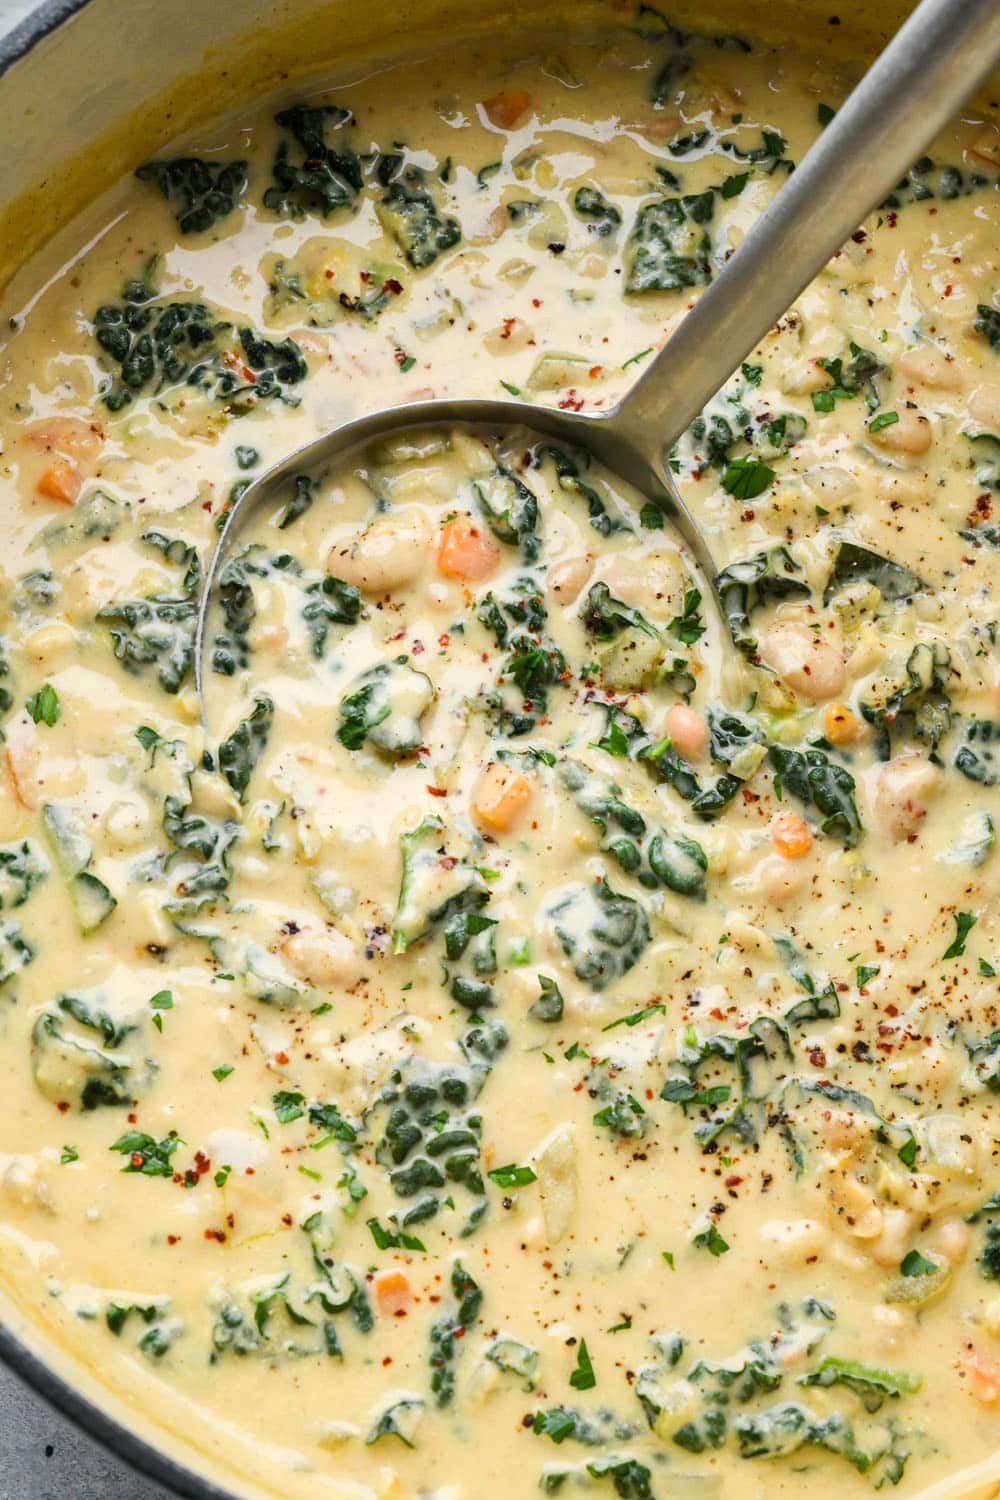 A ladle lifting out a portion of creamy dairy free white bean and kale soup from a large white soup pot.